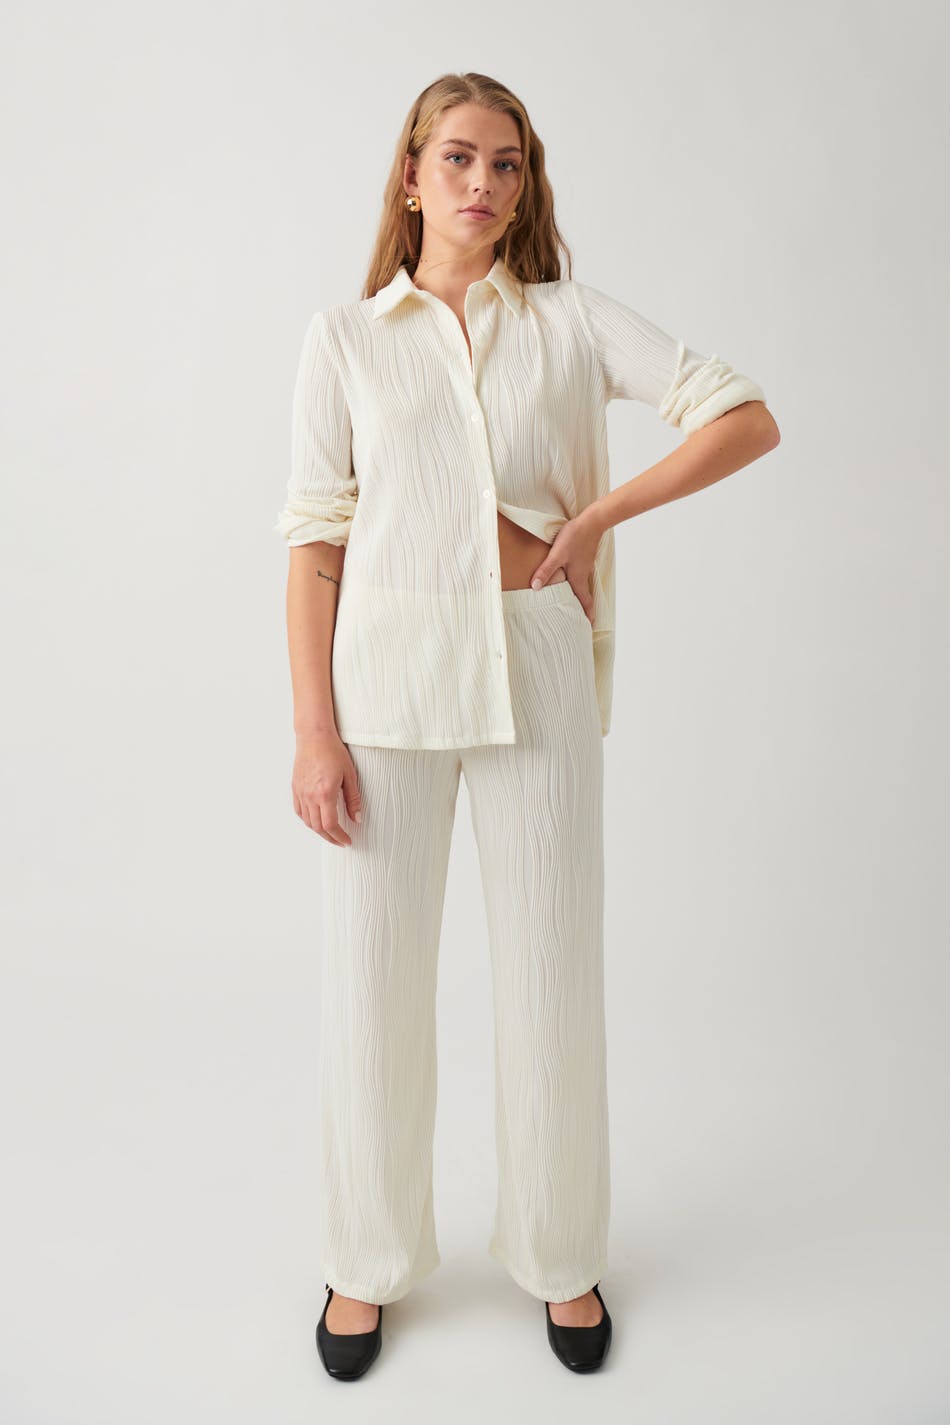 Gina Tricot - Structure trousers - byxor - White - XS - Female